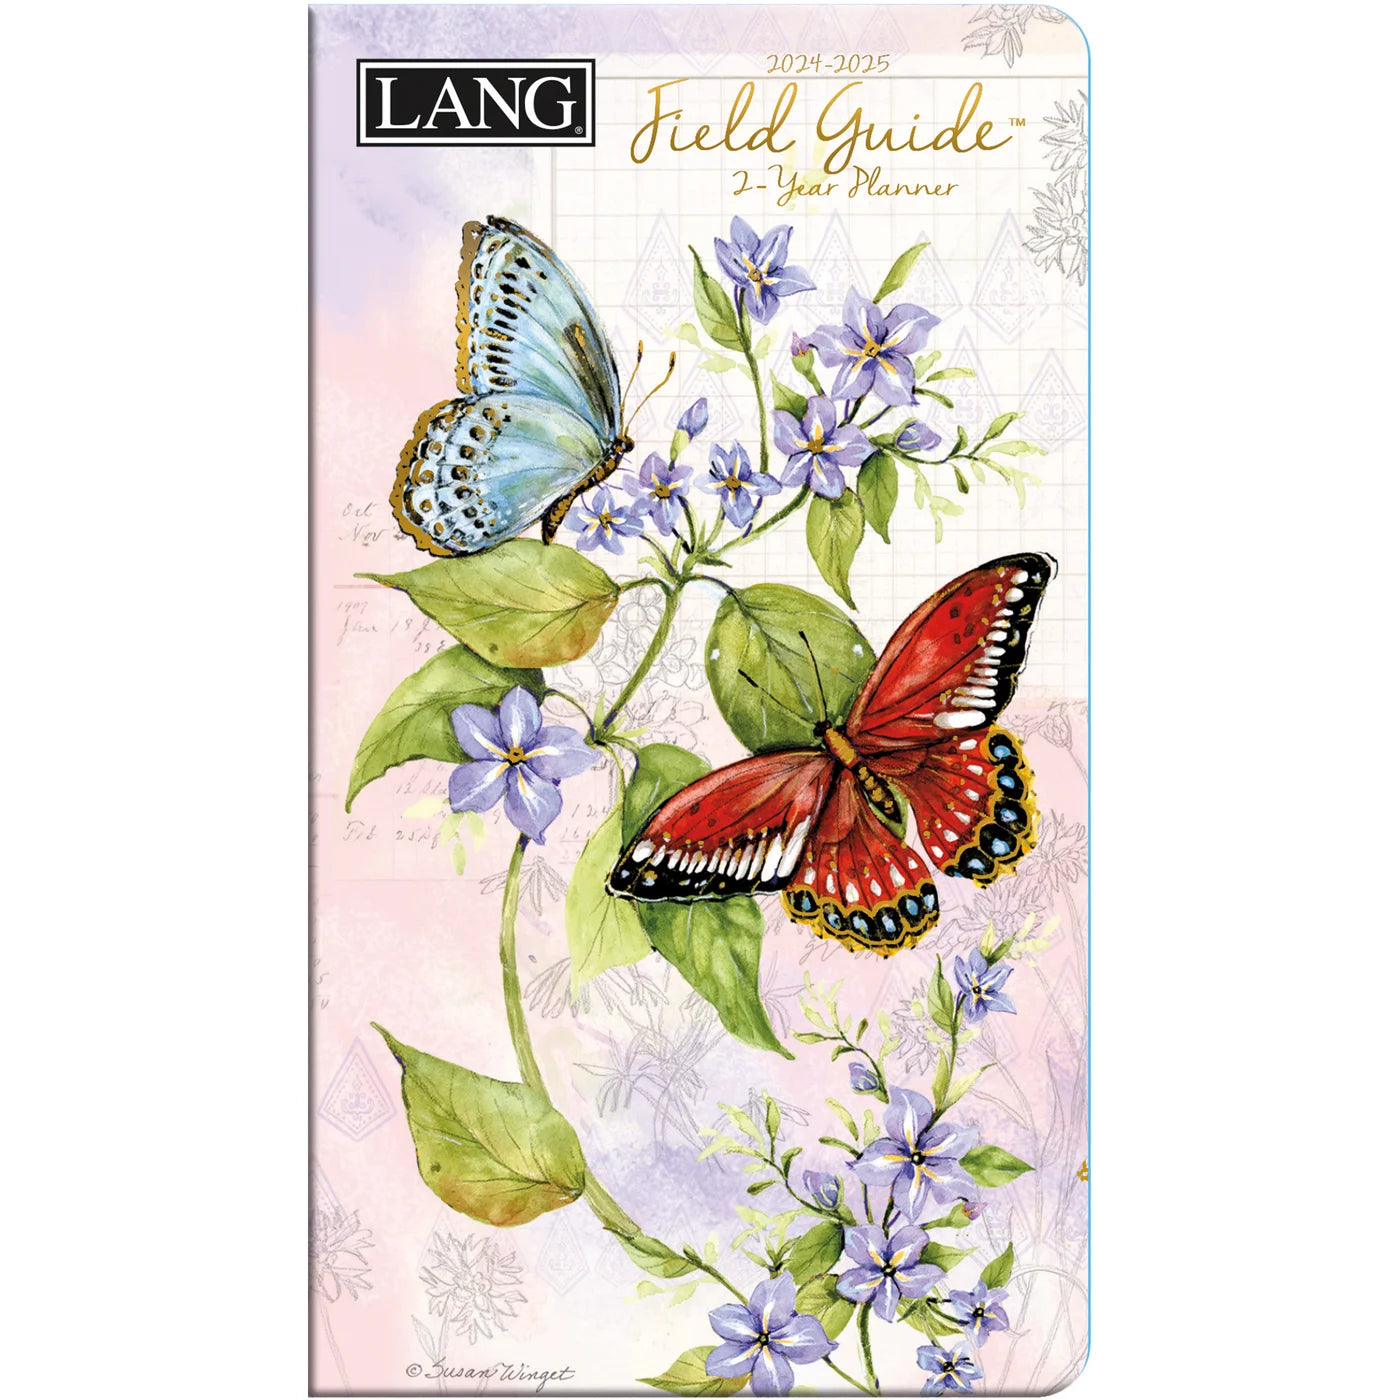 2024-2025 LANG Field Guide - 2 Year Pocket Diary/Planner